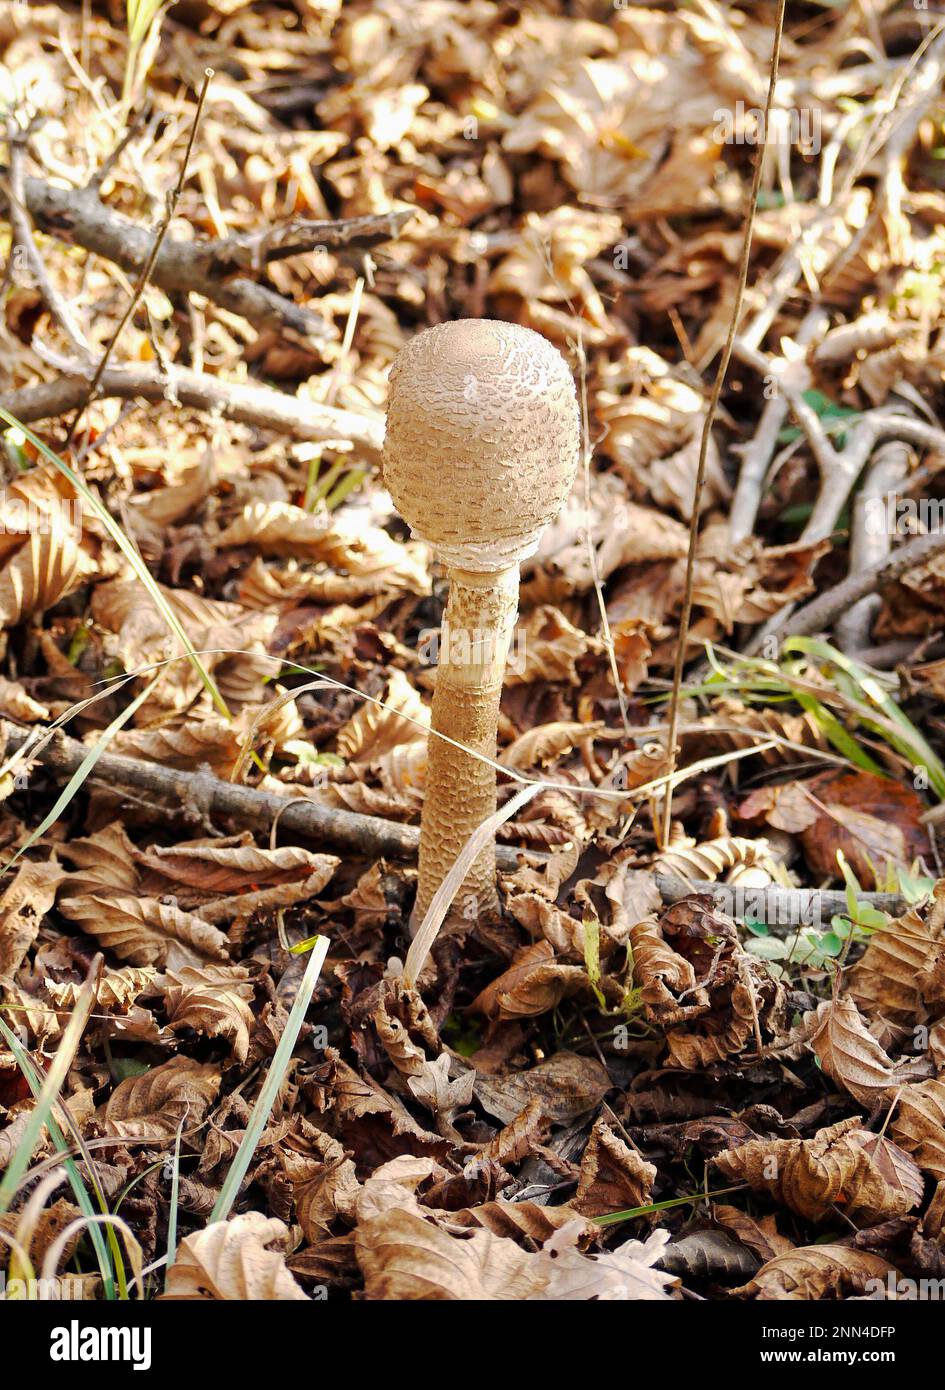 Young Parasol Mushroom emerging through leaf litter in a forest near Peja, Kosovo Stock Photo